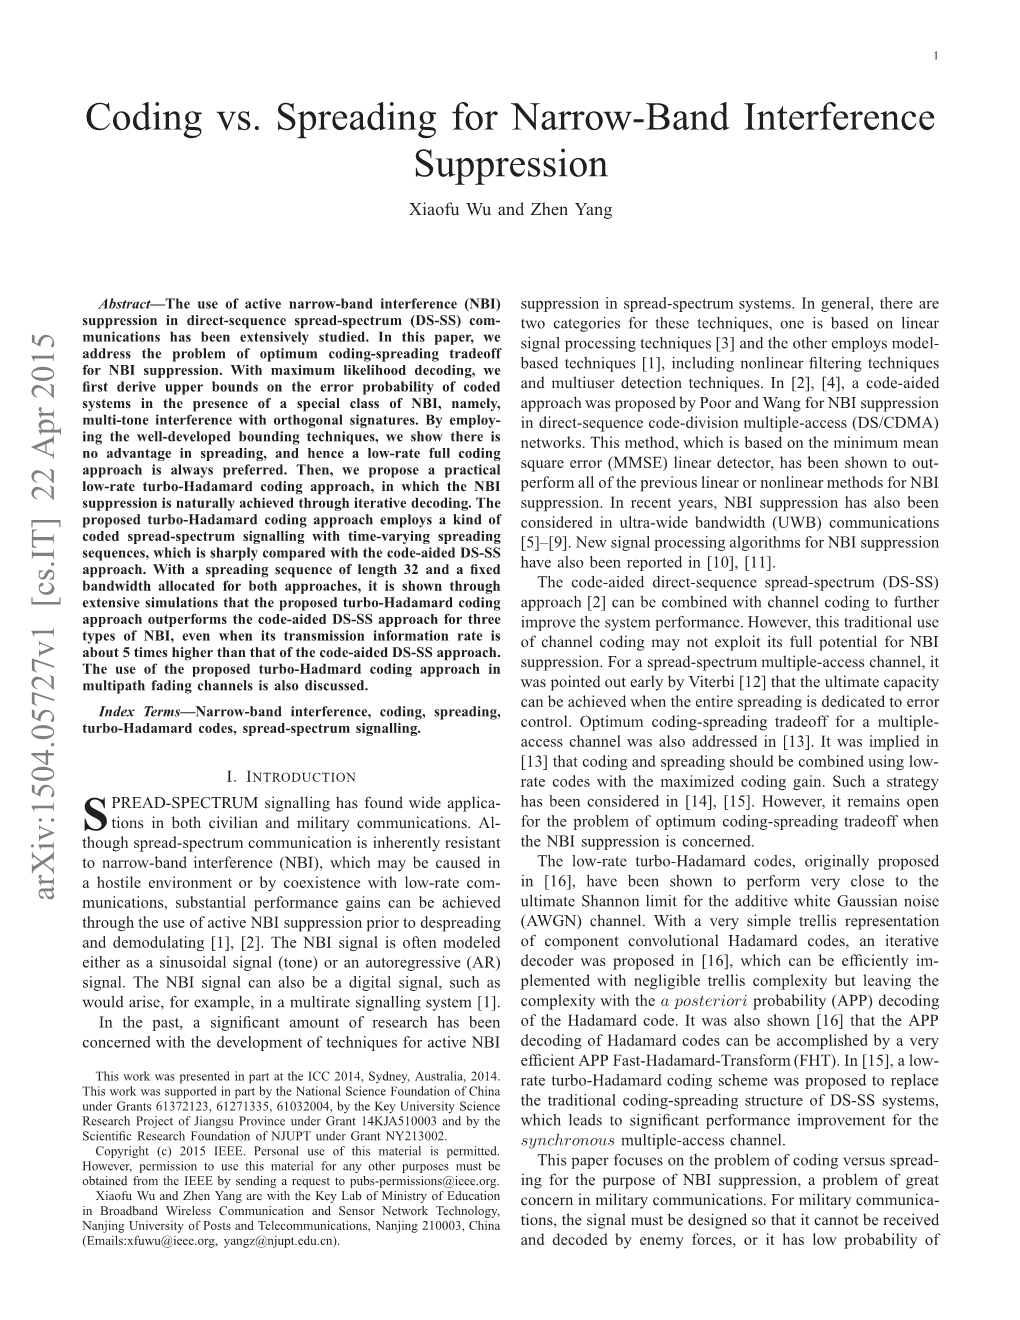 Coding Vs. Spreading for Narrow-Band Interference Suppression